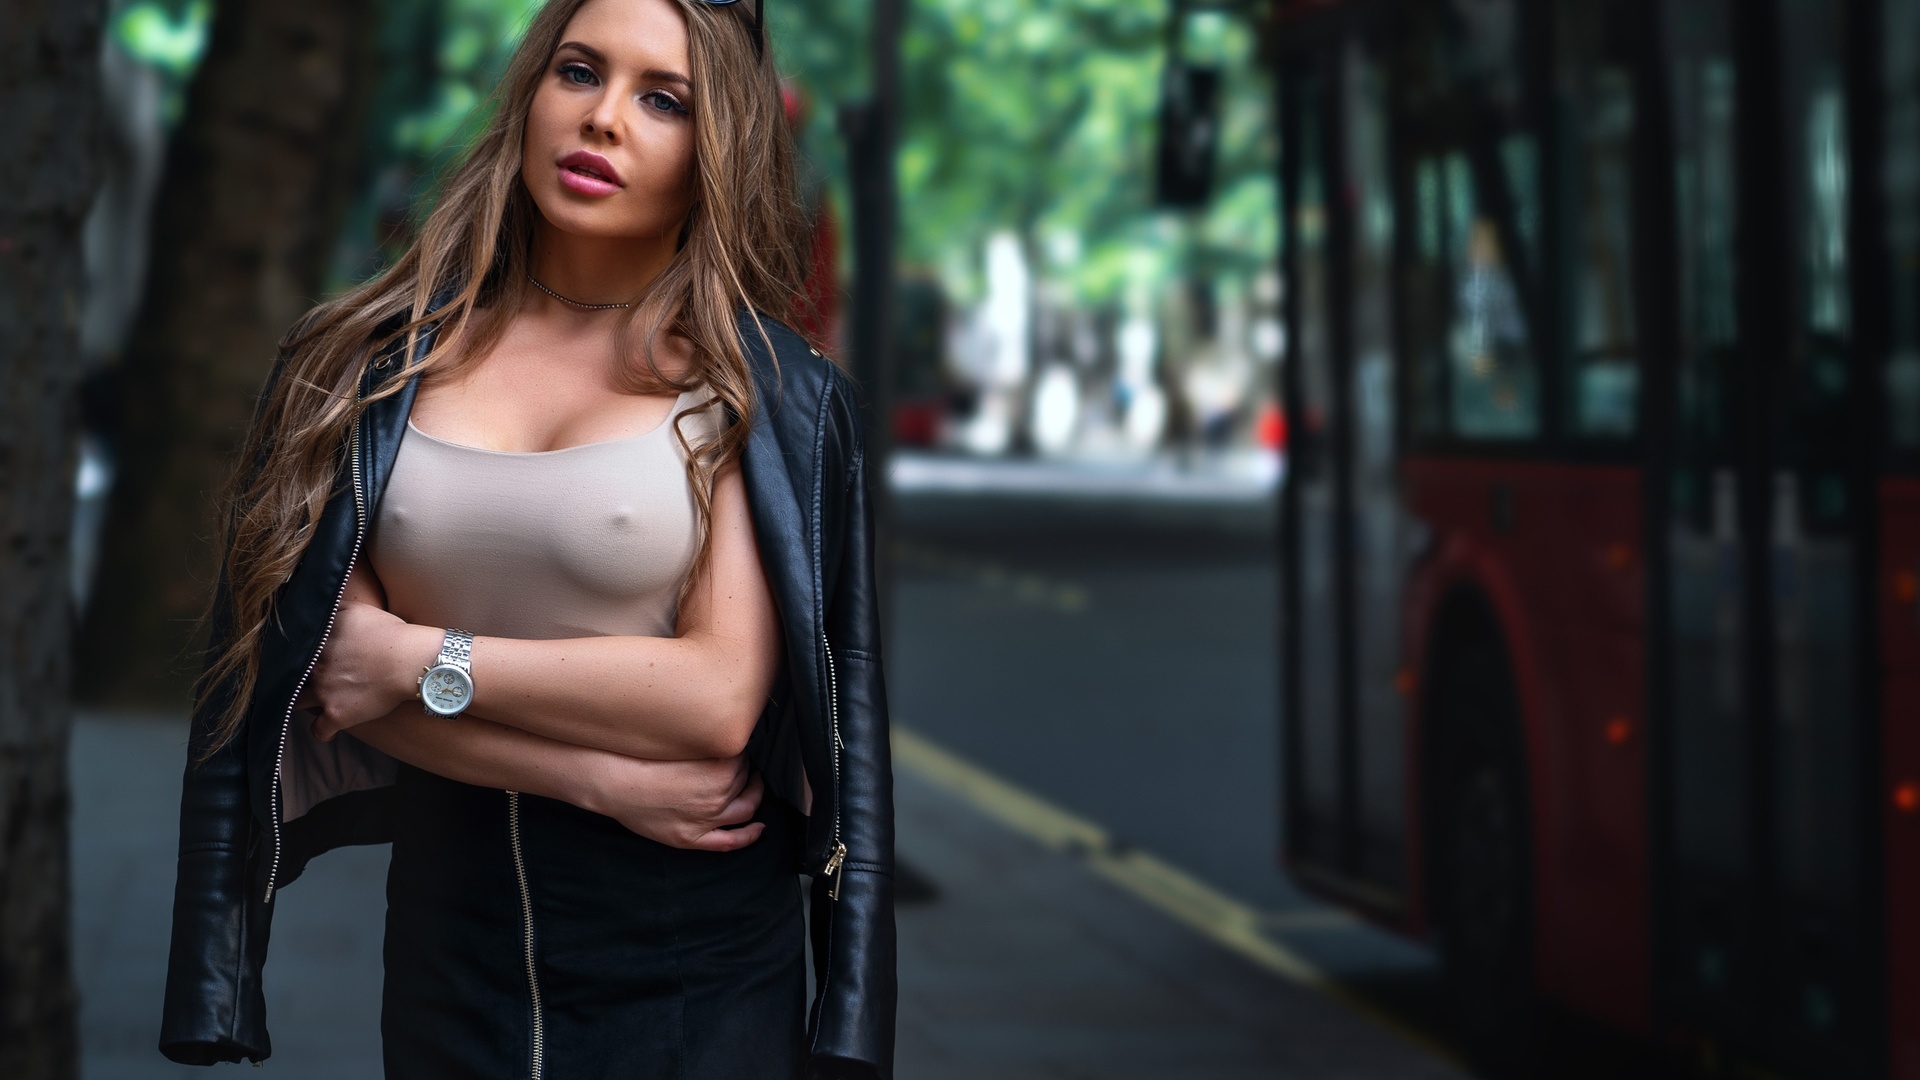 women, trees, buses, arms crossed, sunglasses, nipples through clothing, watch, leather jackets, pink lipstick, portrait